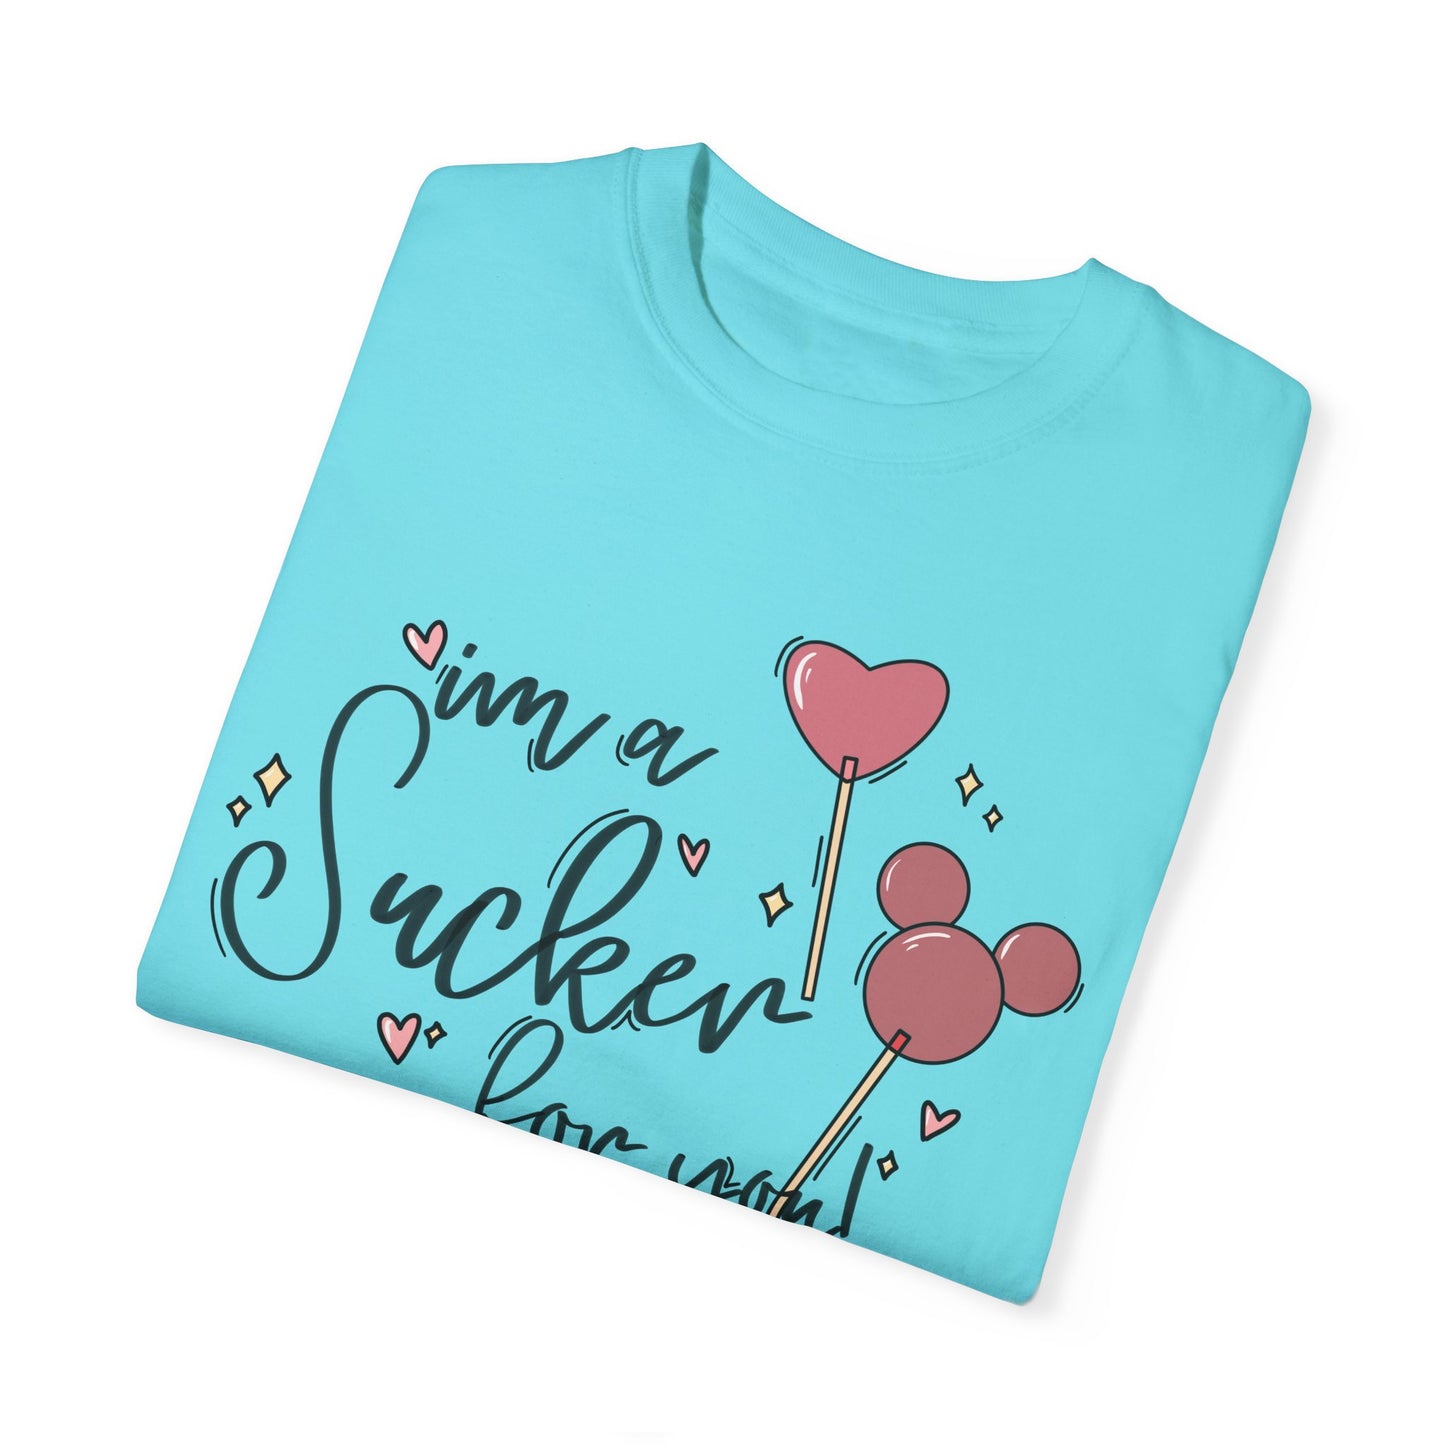 Adult Sucker for you Tee